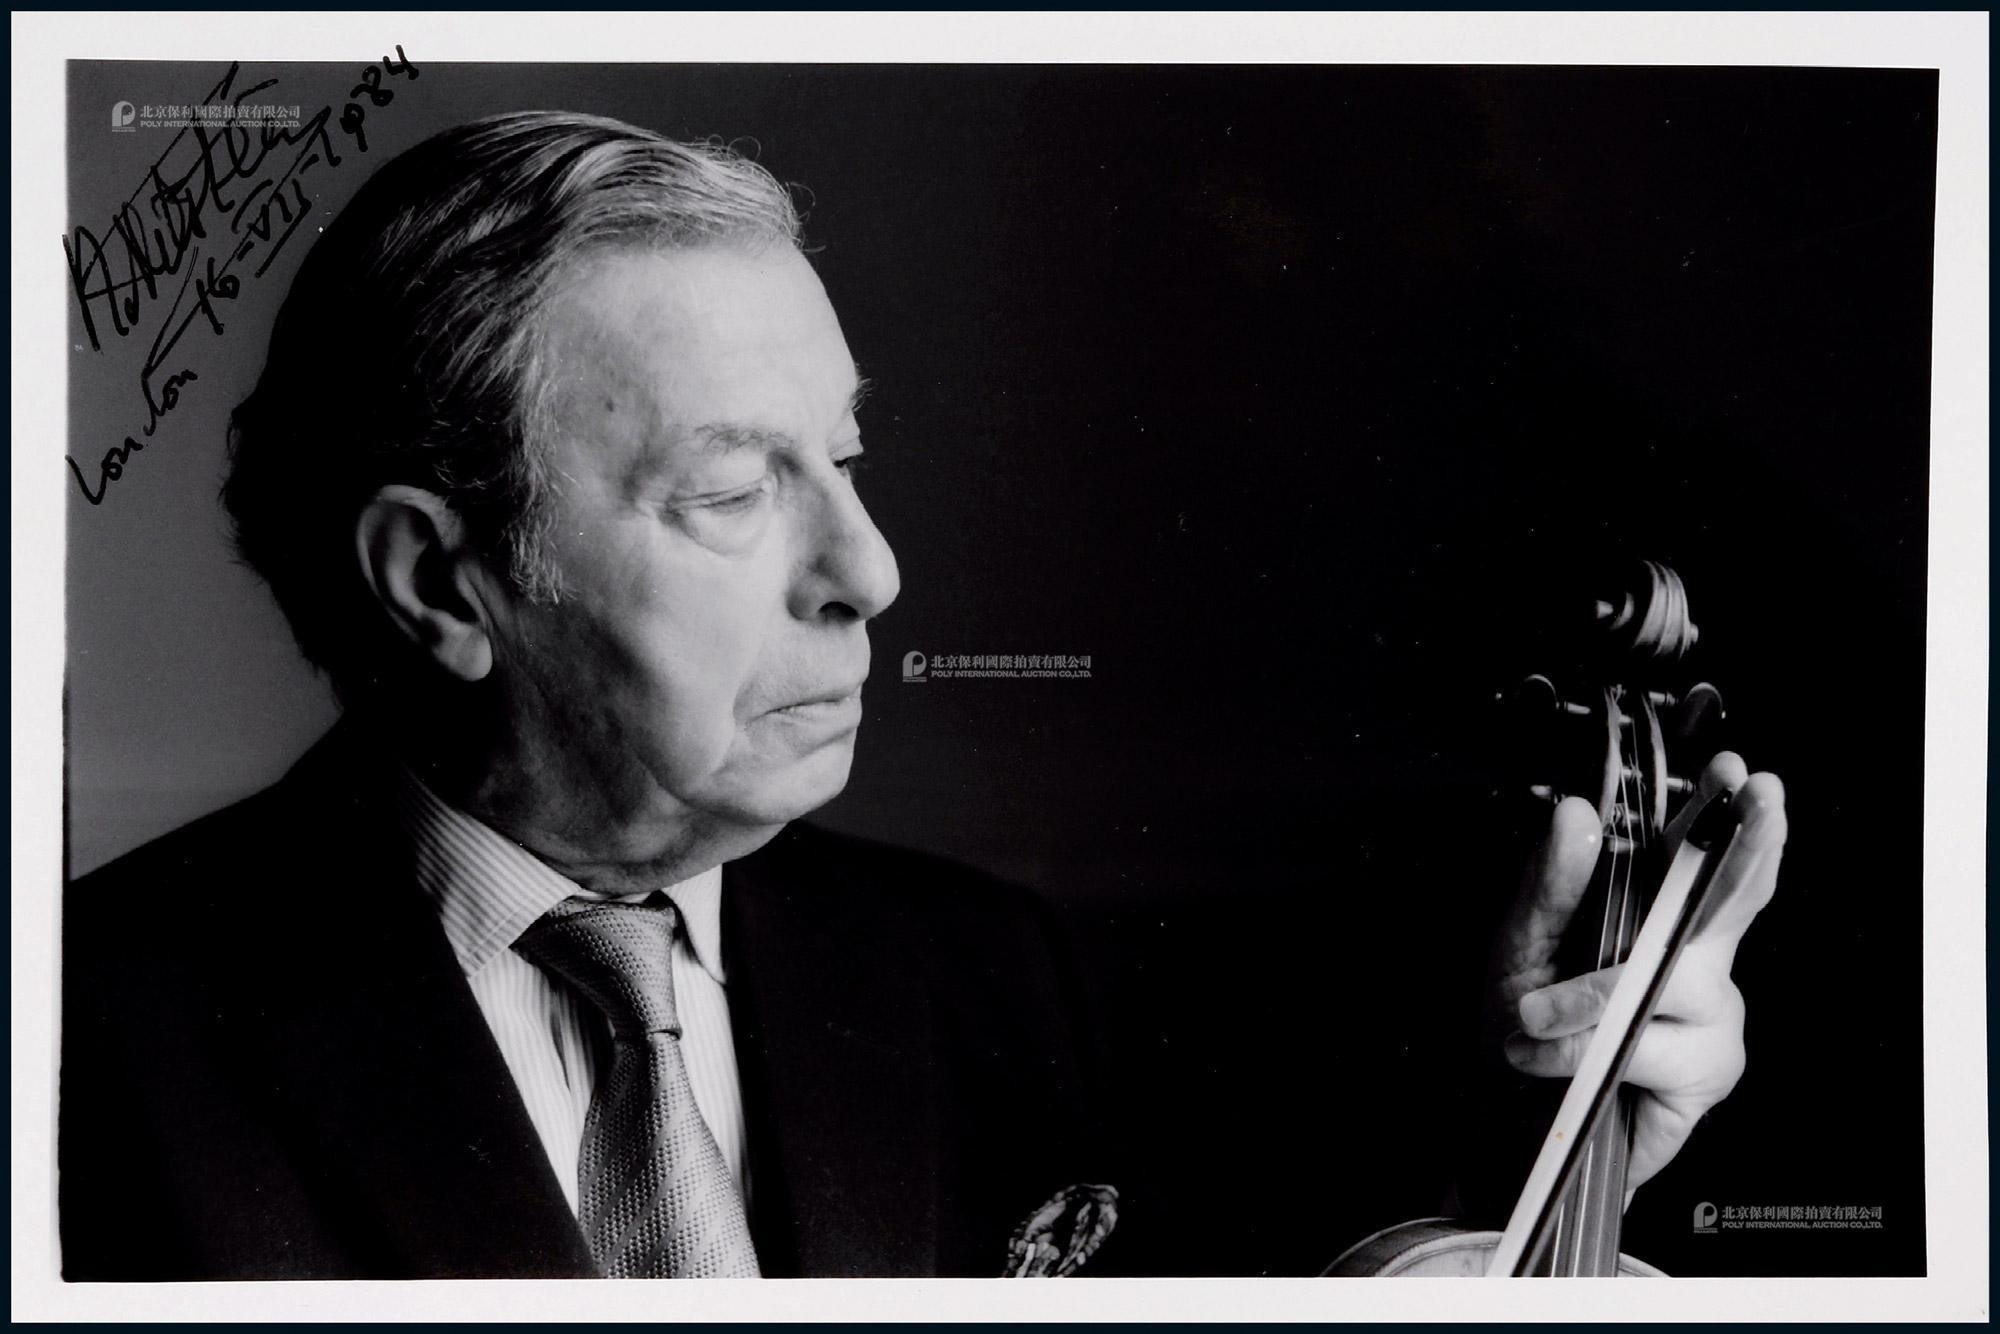 The autographed photo of Milstein, “the famous English violinist”, with certificate